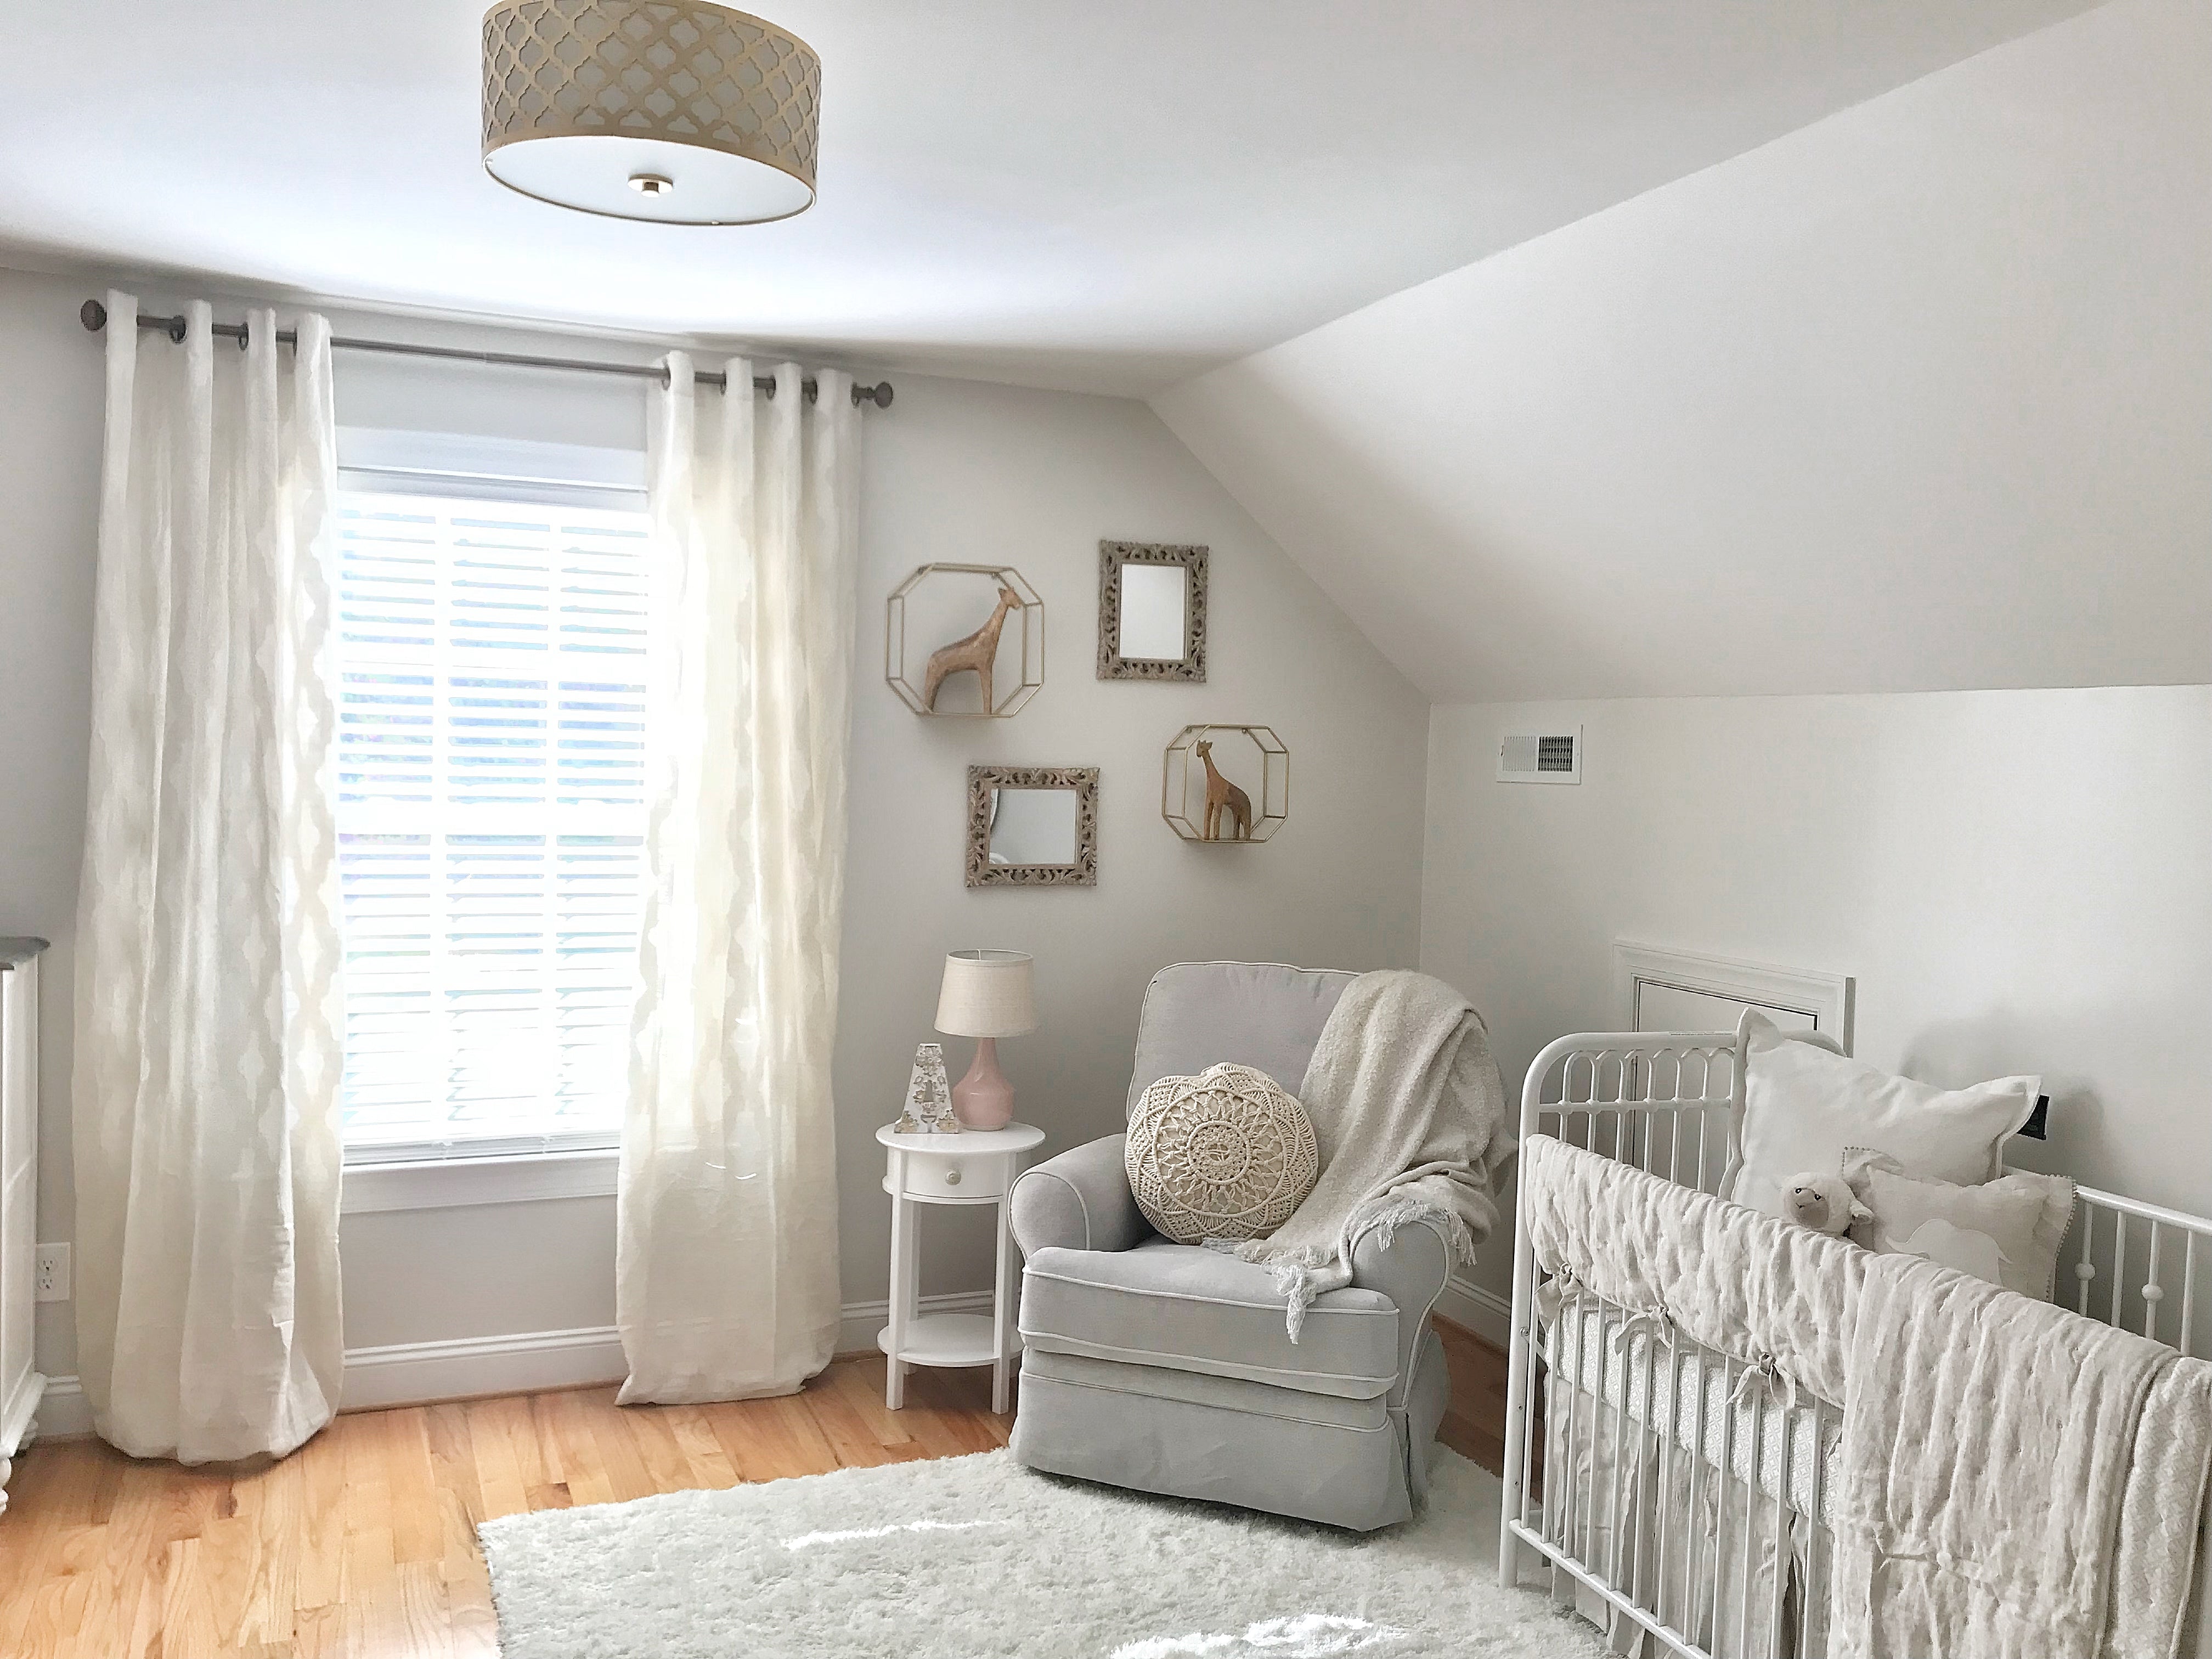 Nursery Room Lighting: What You Need to Know